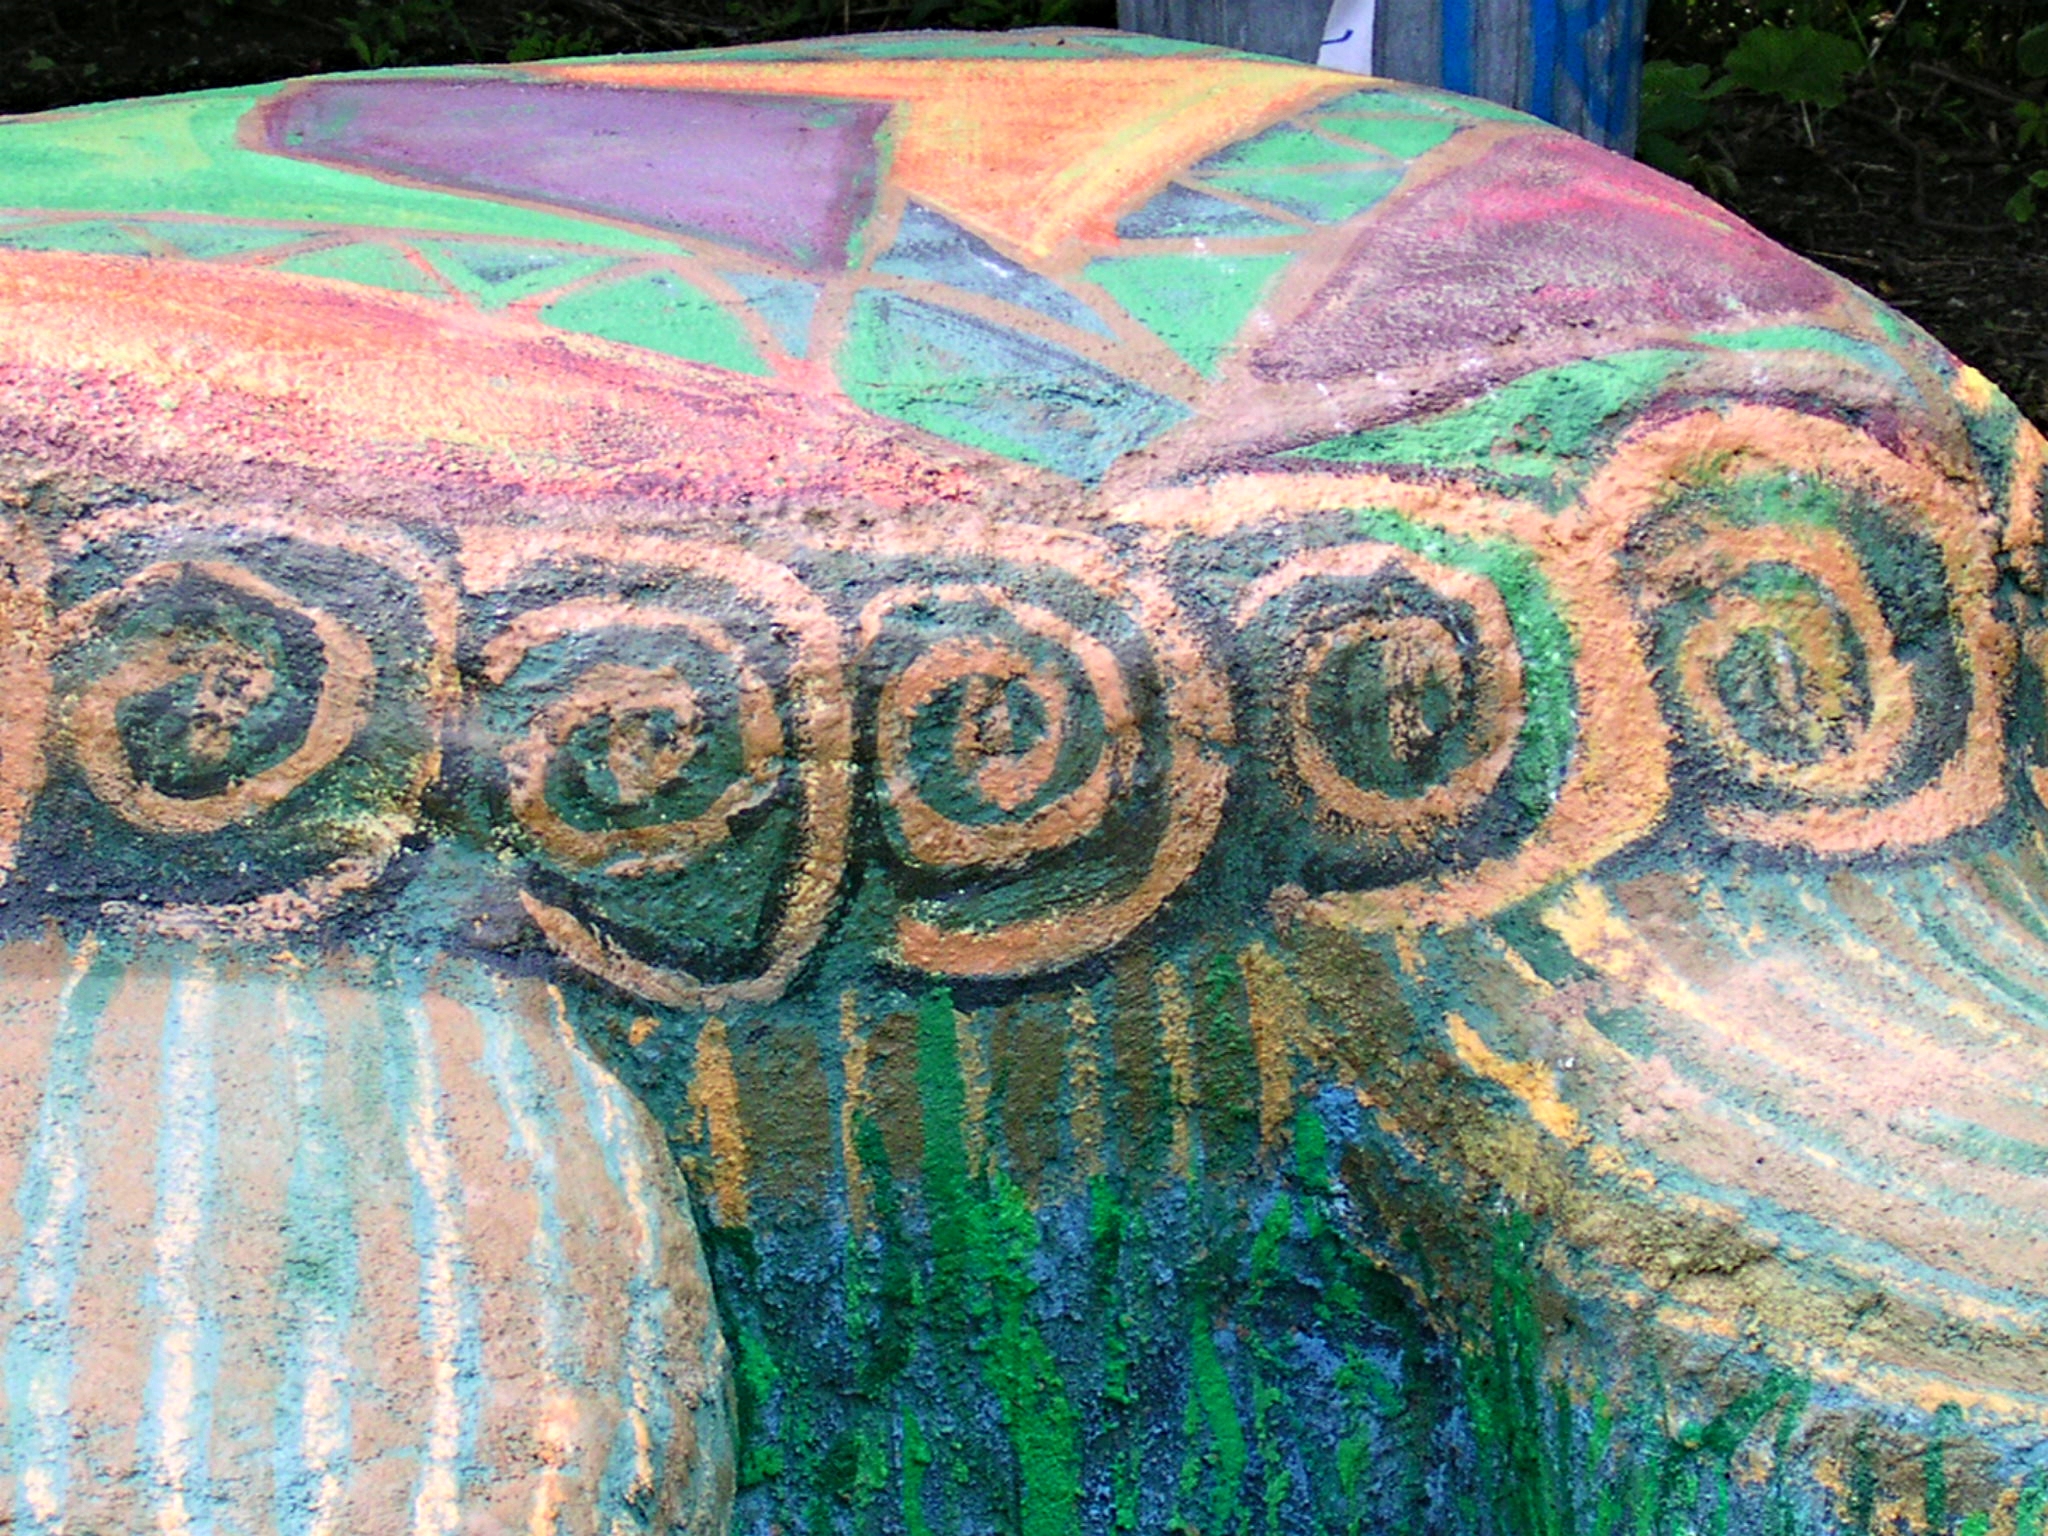 detail of "the frog" picnic table